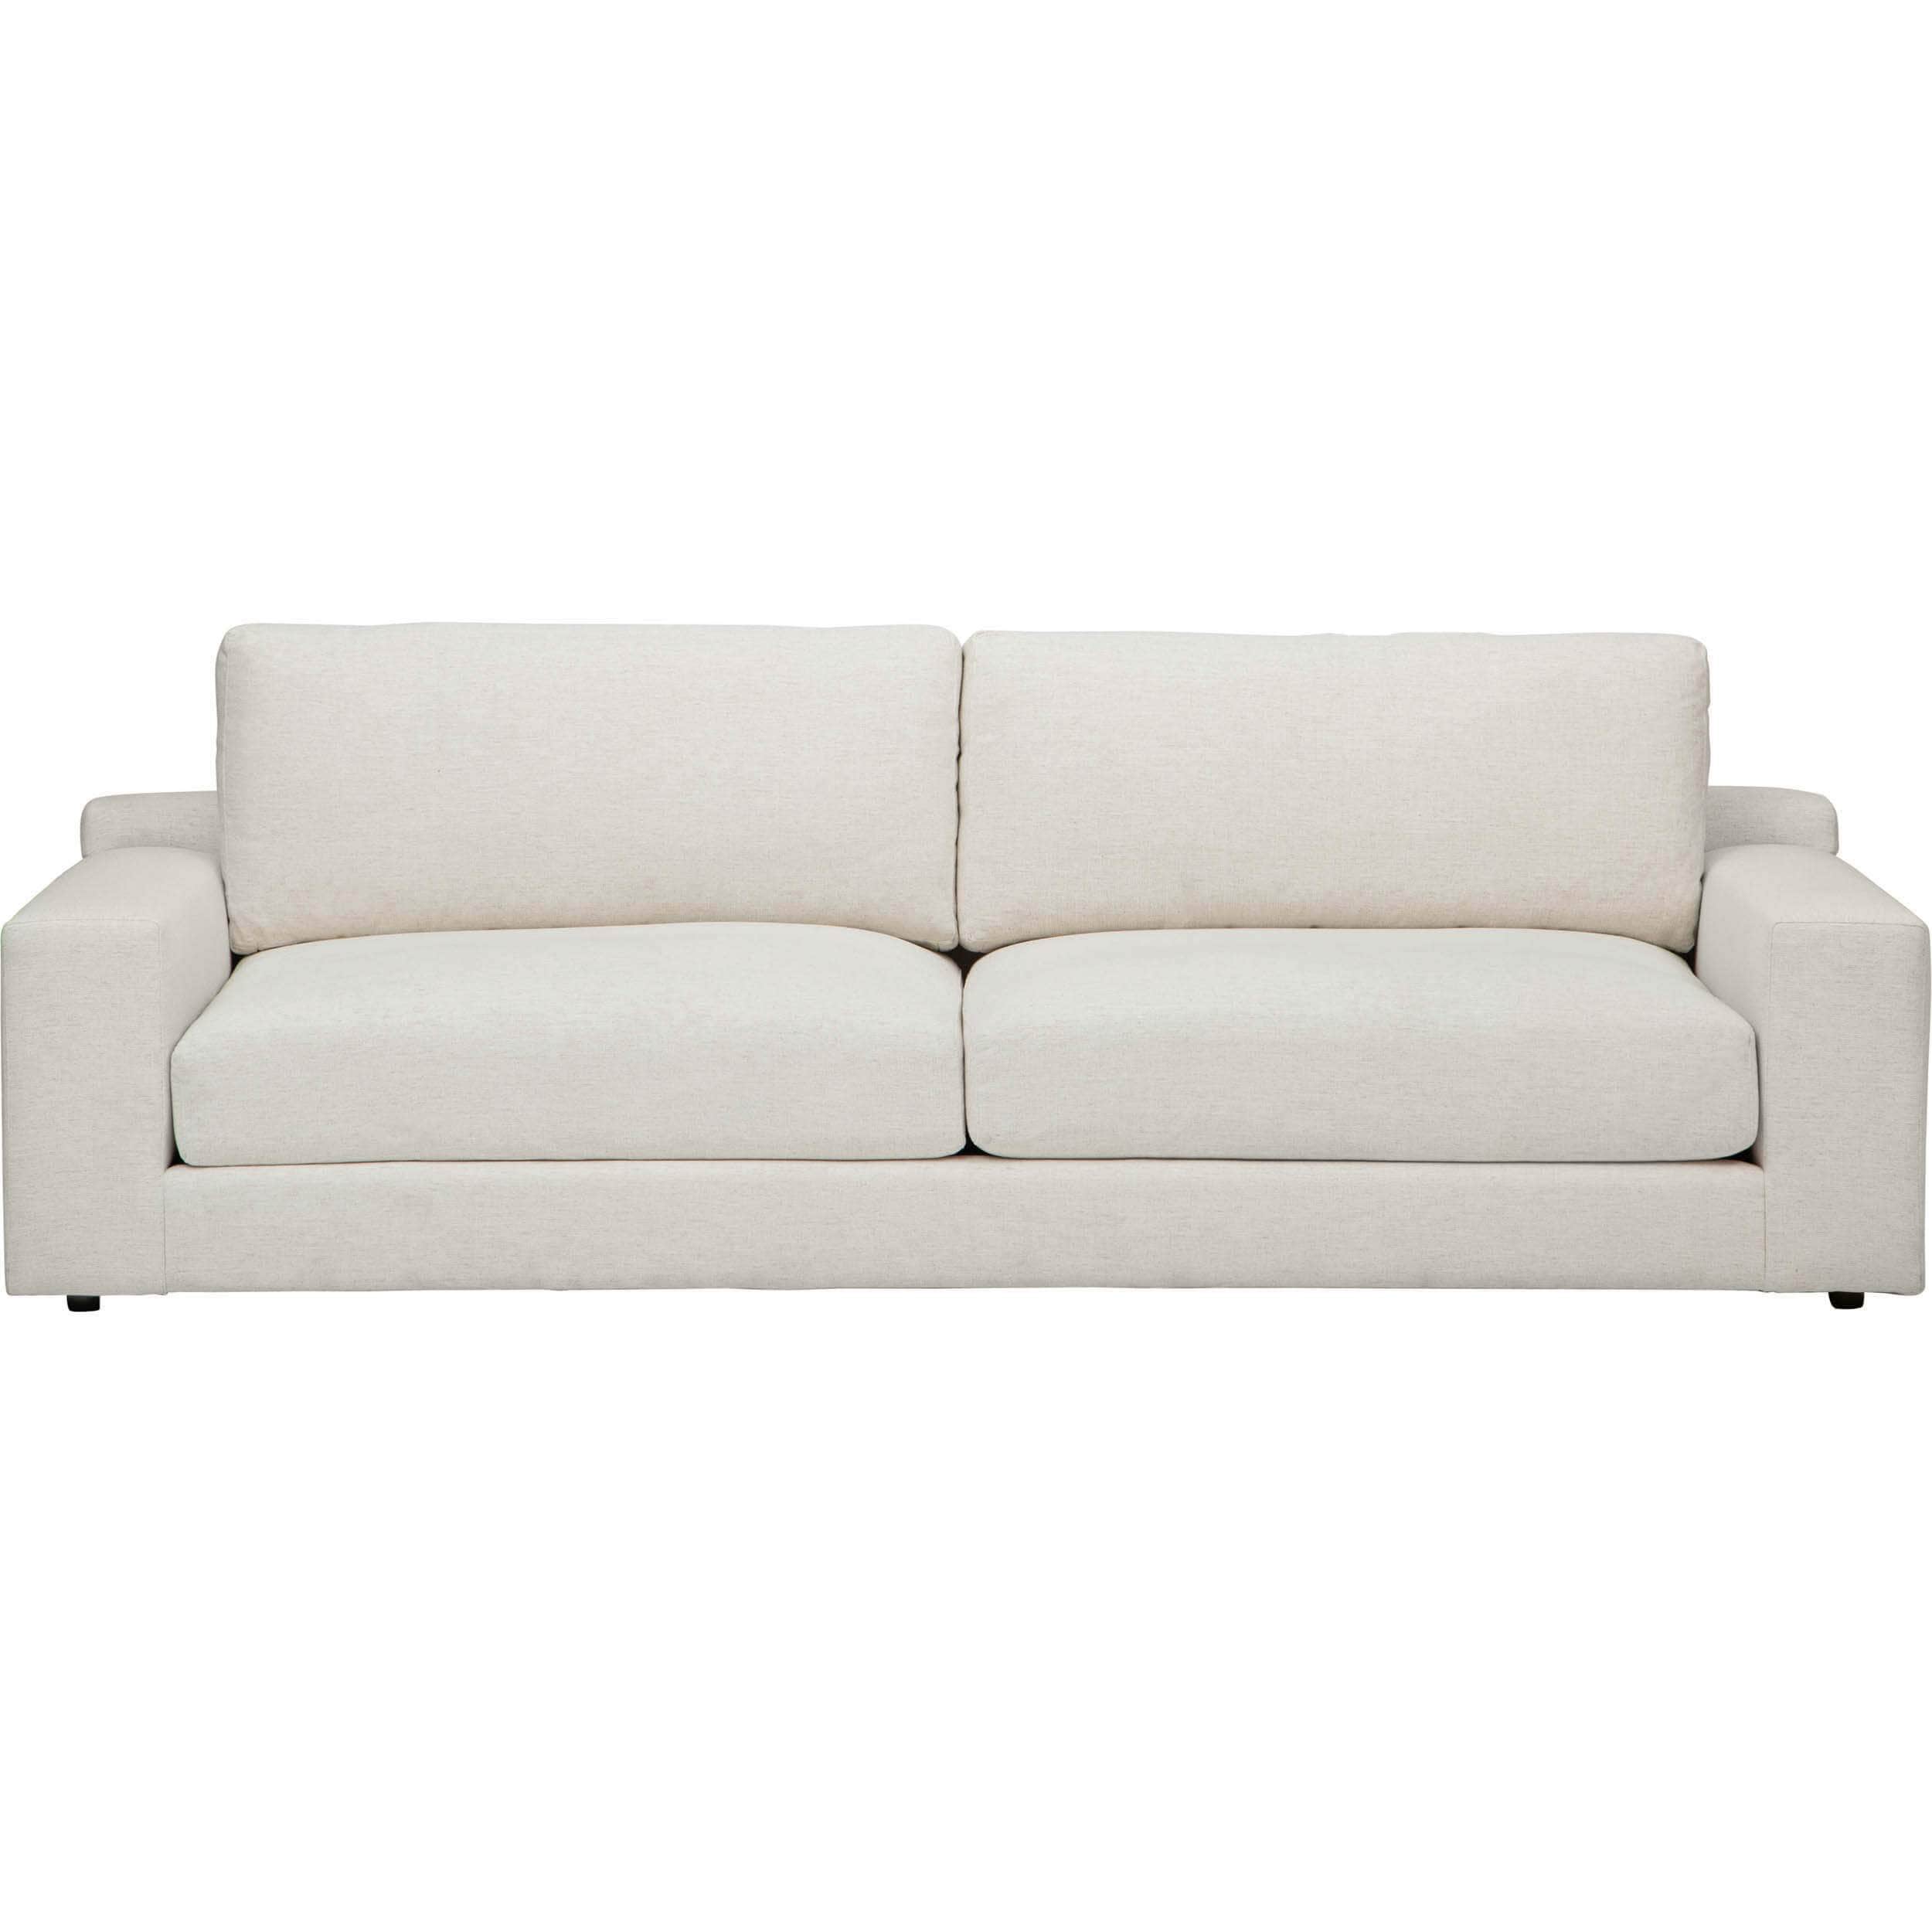 Image of Axel Sofa, Nomad Snow